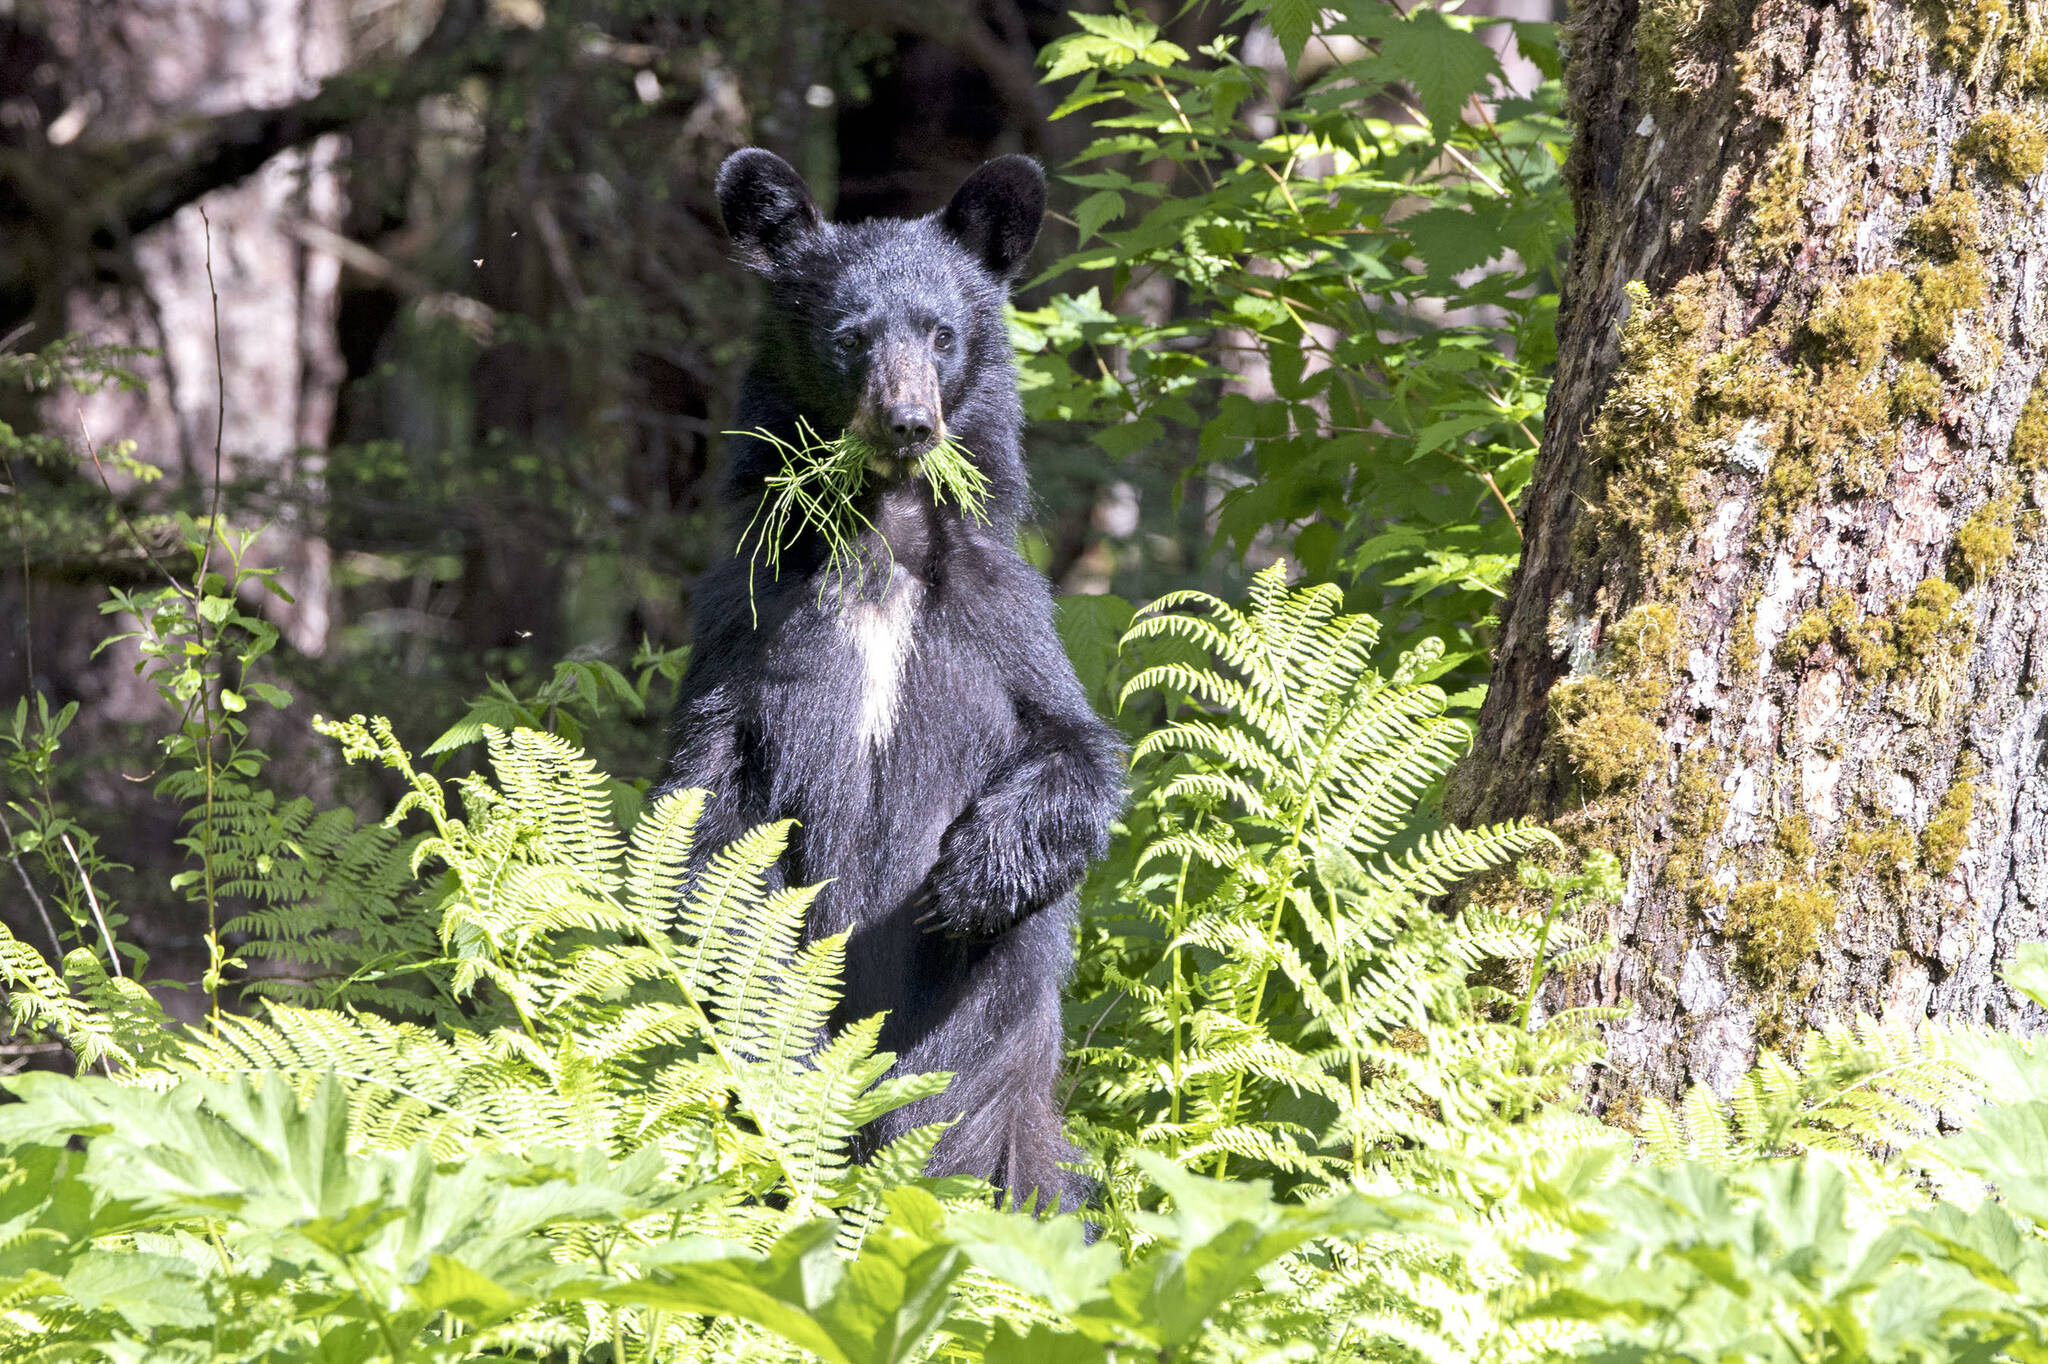 Young black bear alerted by loud motor vehicle while having lunch out the road on June 17. (Courtesy Photo / Kenneth Gill, gillfoto)